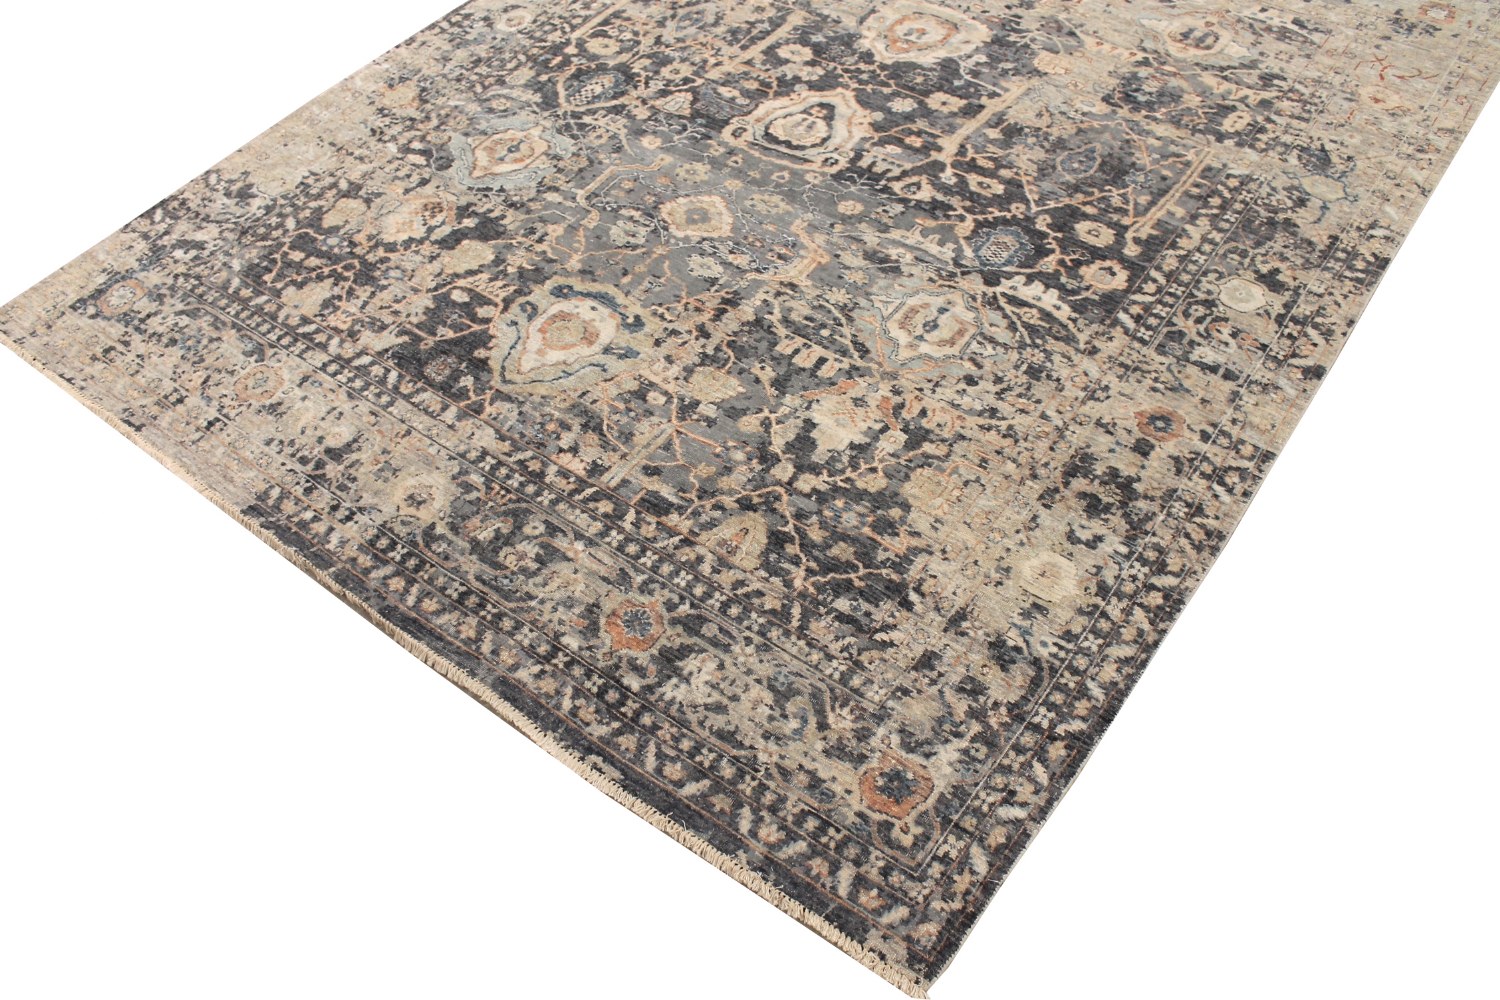 8x10 Aryana & Antique Revivals Hand Knotted Wool Area Rug - MR028538